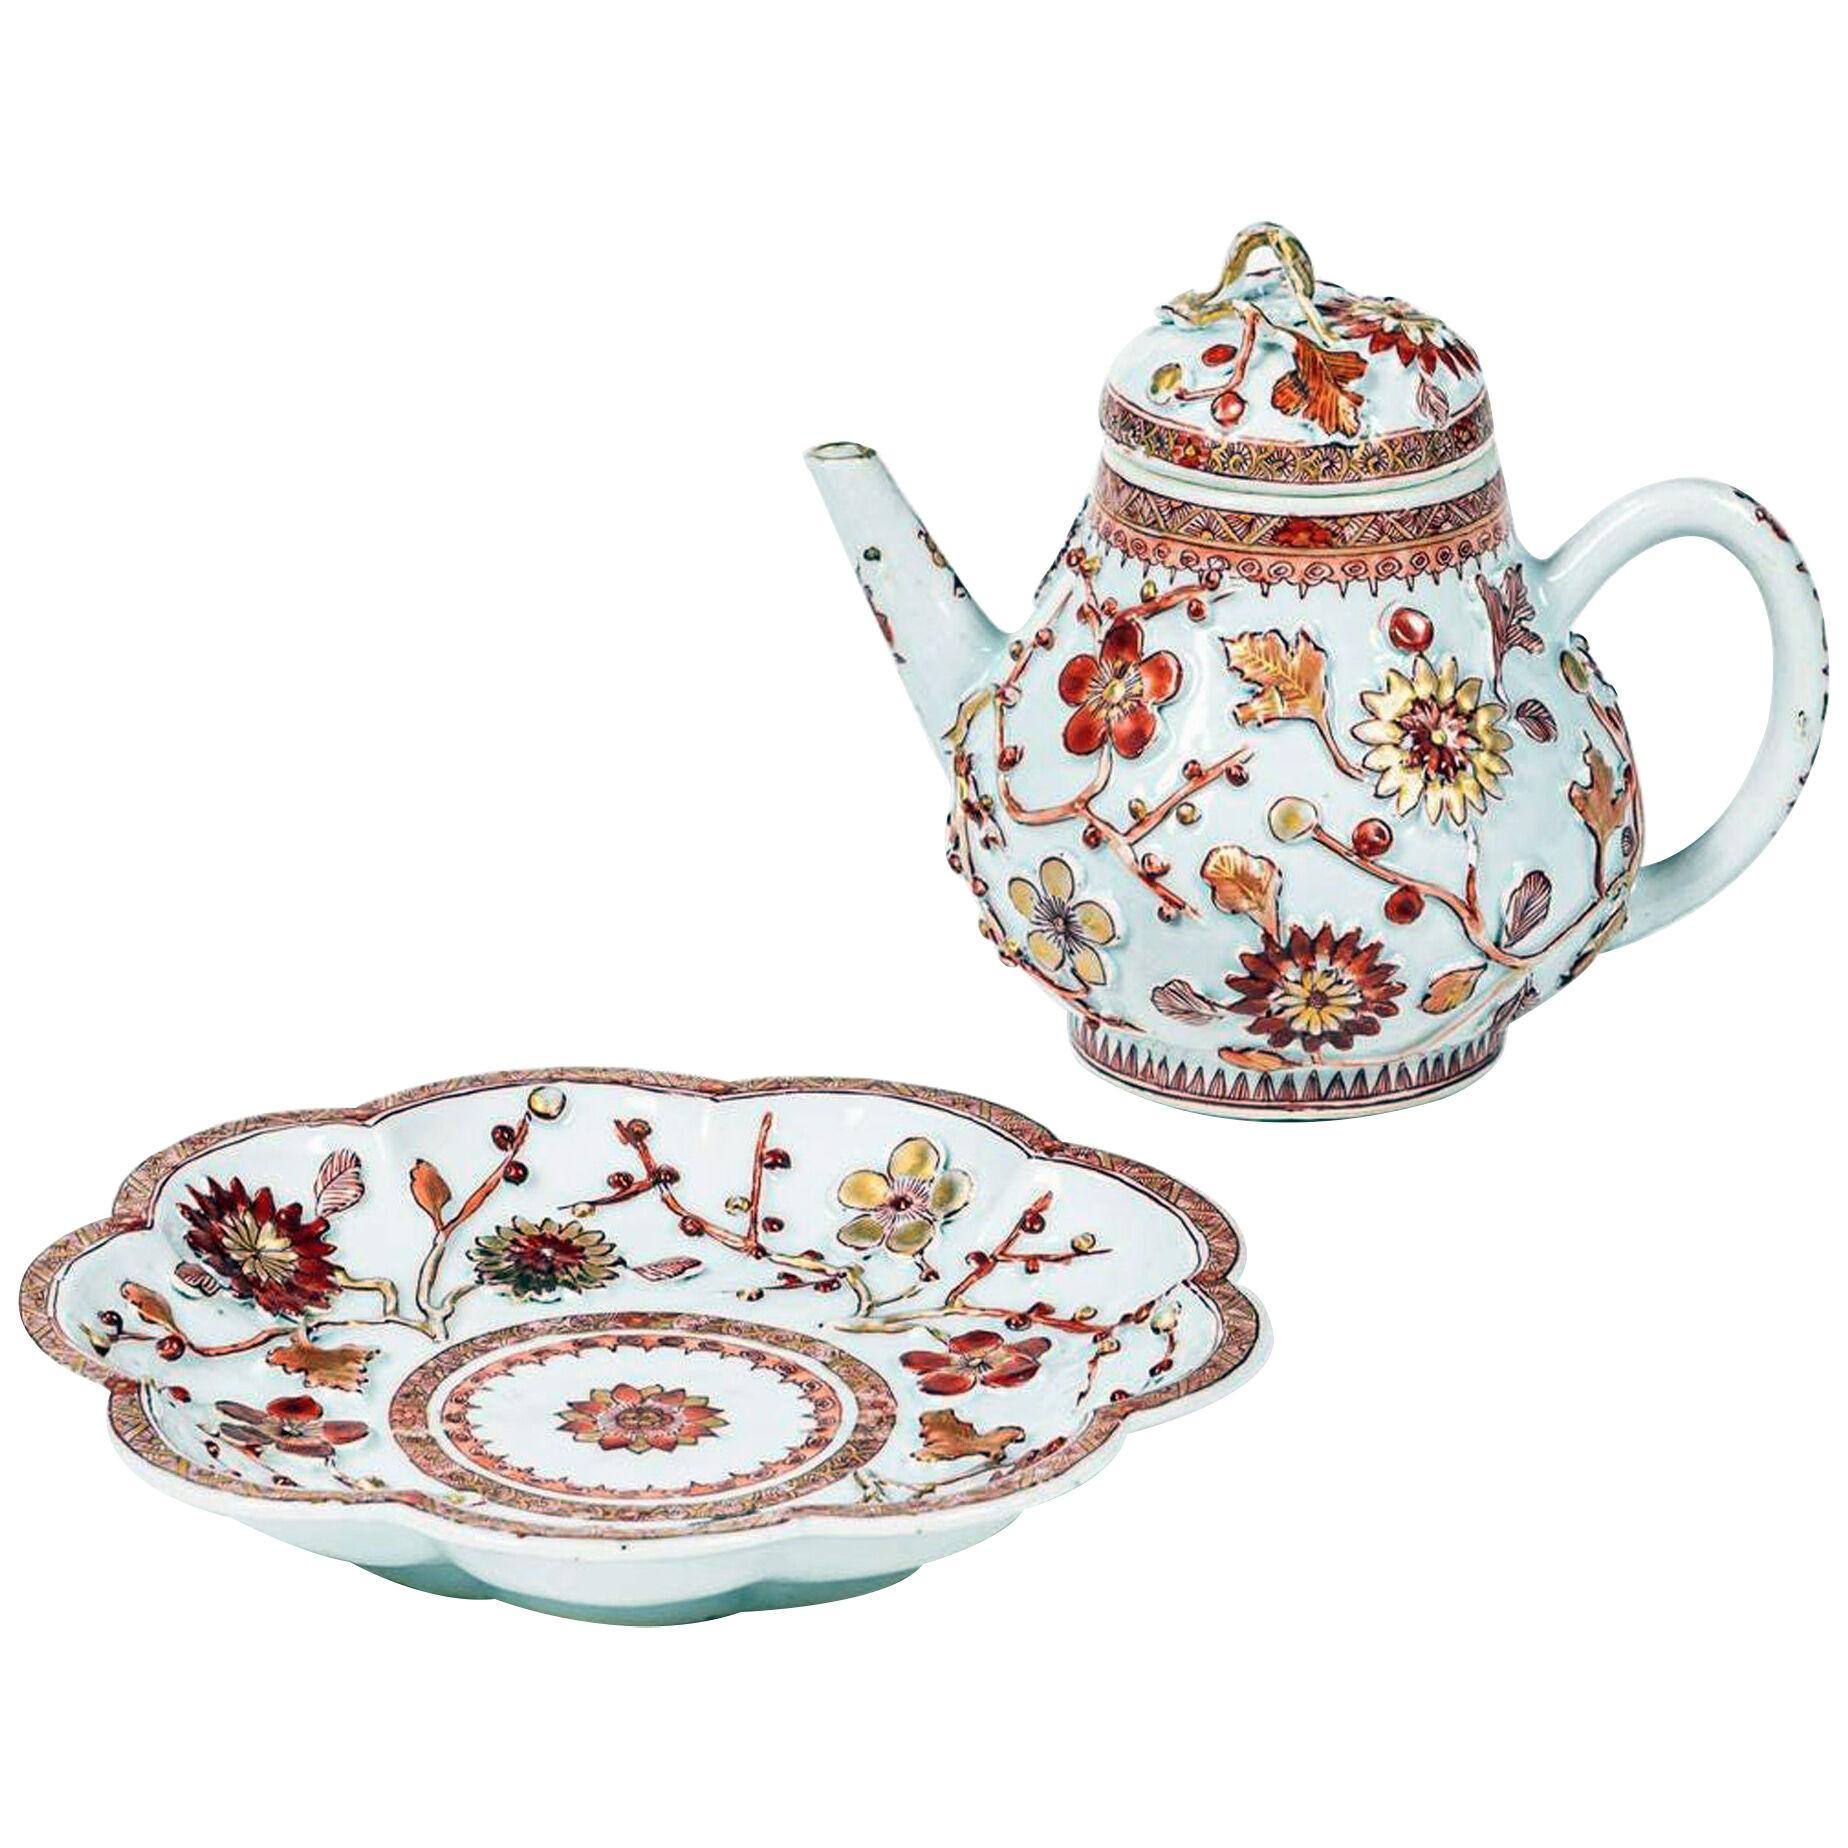 Chinese Export Porcelain Rouge de Fer & Gilt Teapot & Stand, Early 18th Century